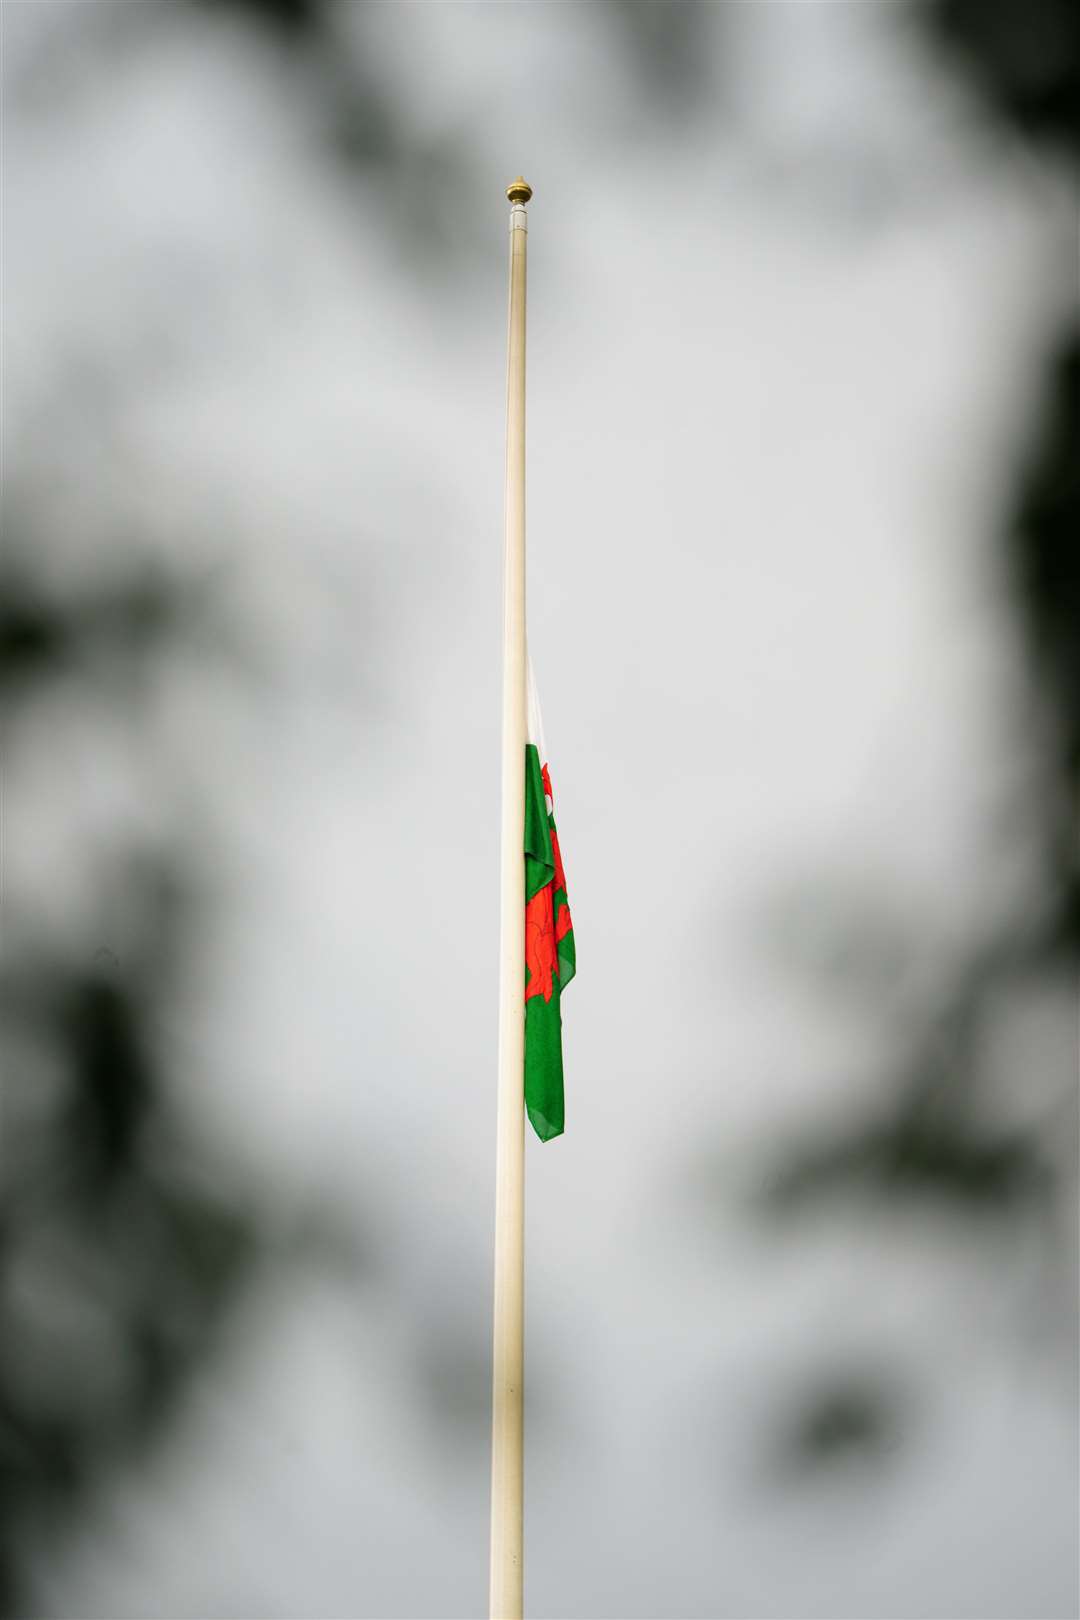 The Welsh flag is flown at half mast above the Government buildings in Cathays Park, in Cardiff Bay, Wales, following the announcement of the death of Queen Elizabeth II (Ben Birchall/PA)